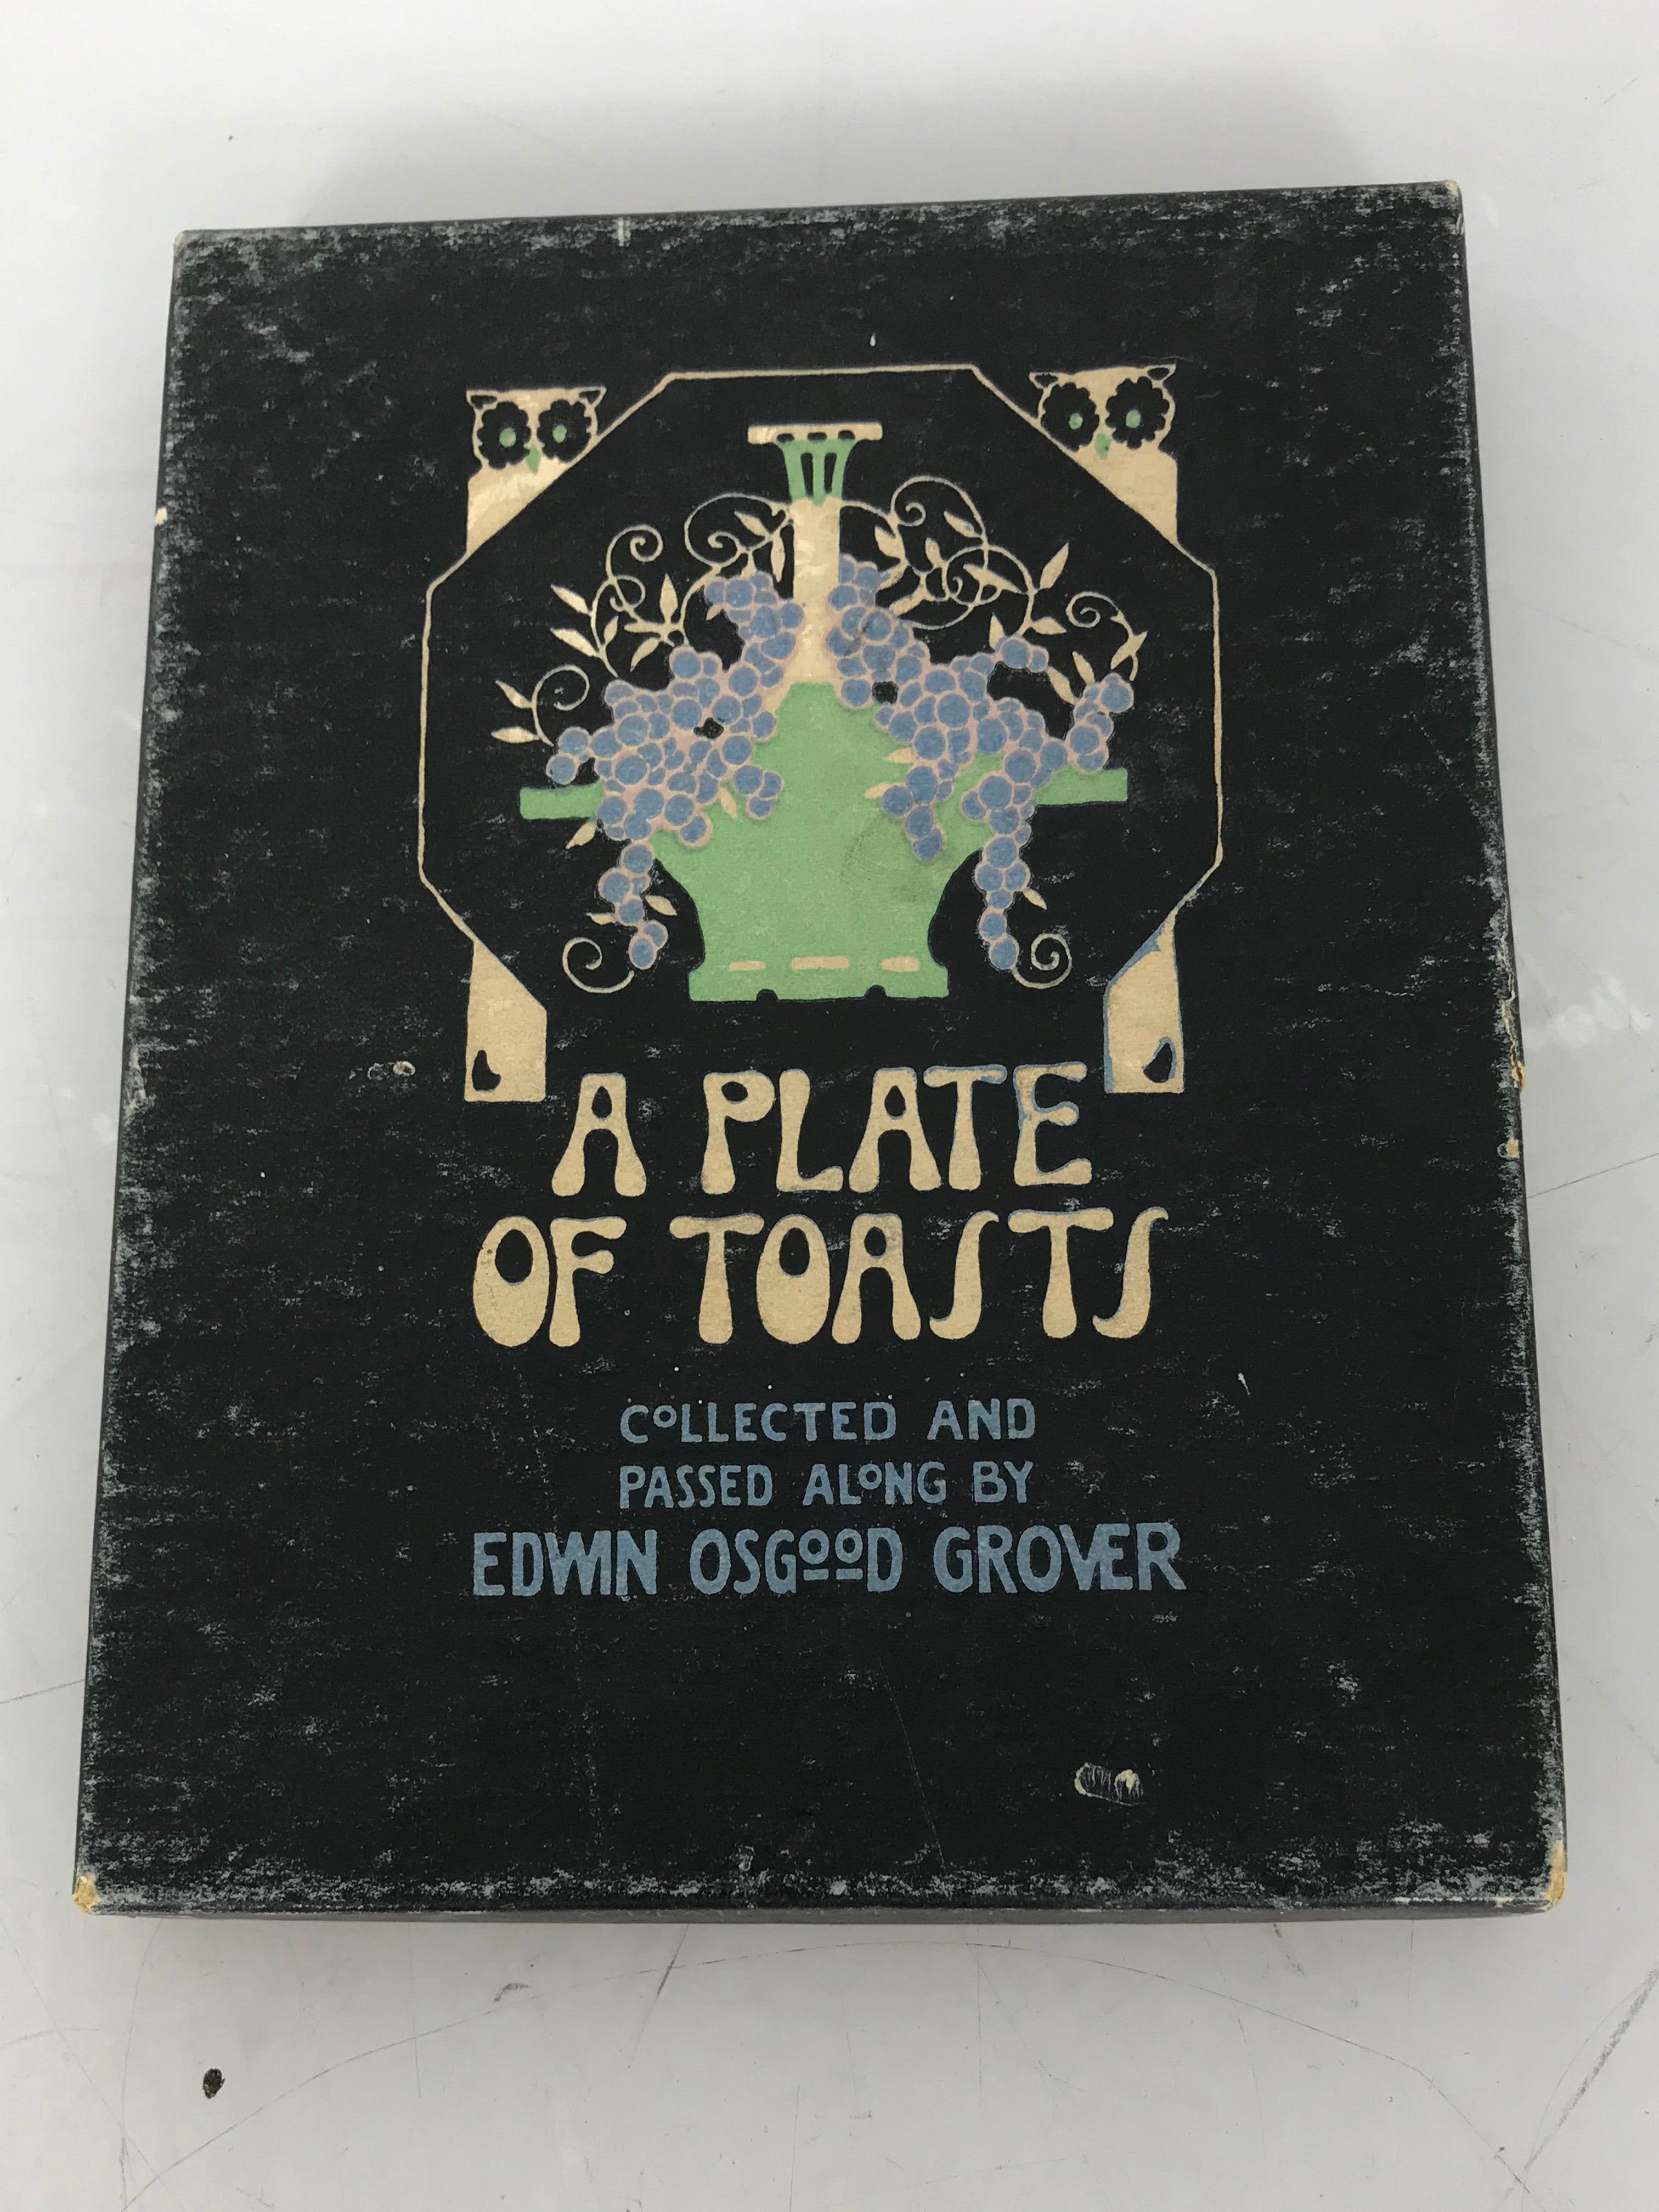 A Plate of Toasts by Edwin Osgood Grover with Box 1916